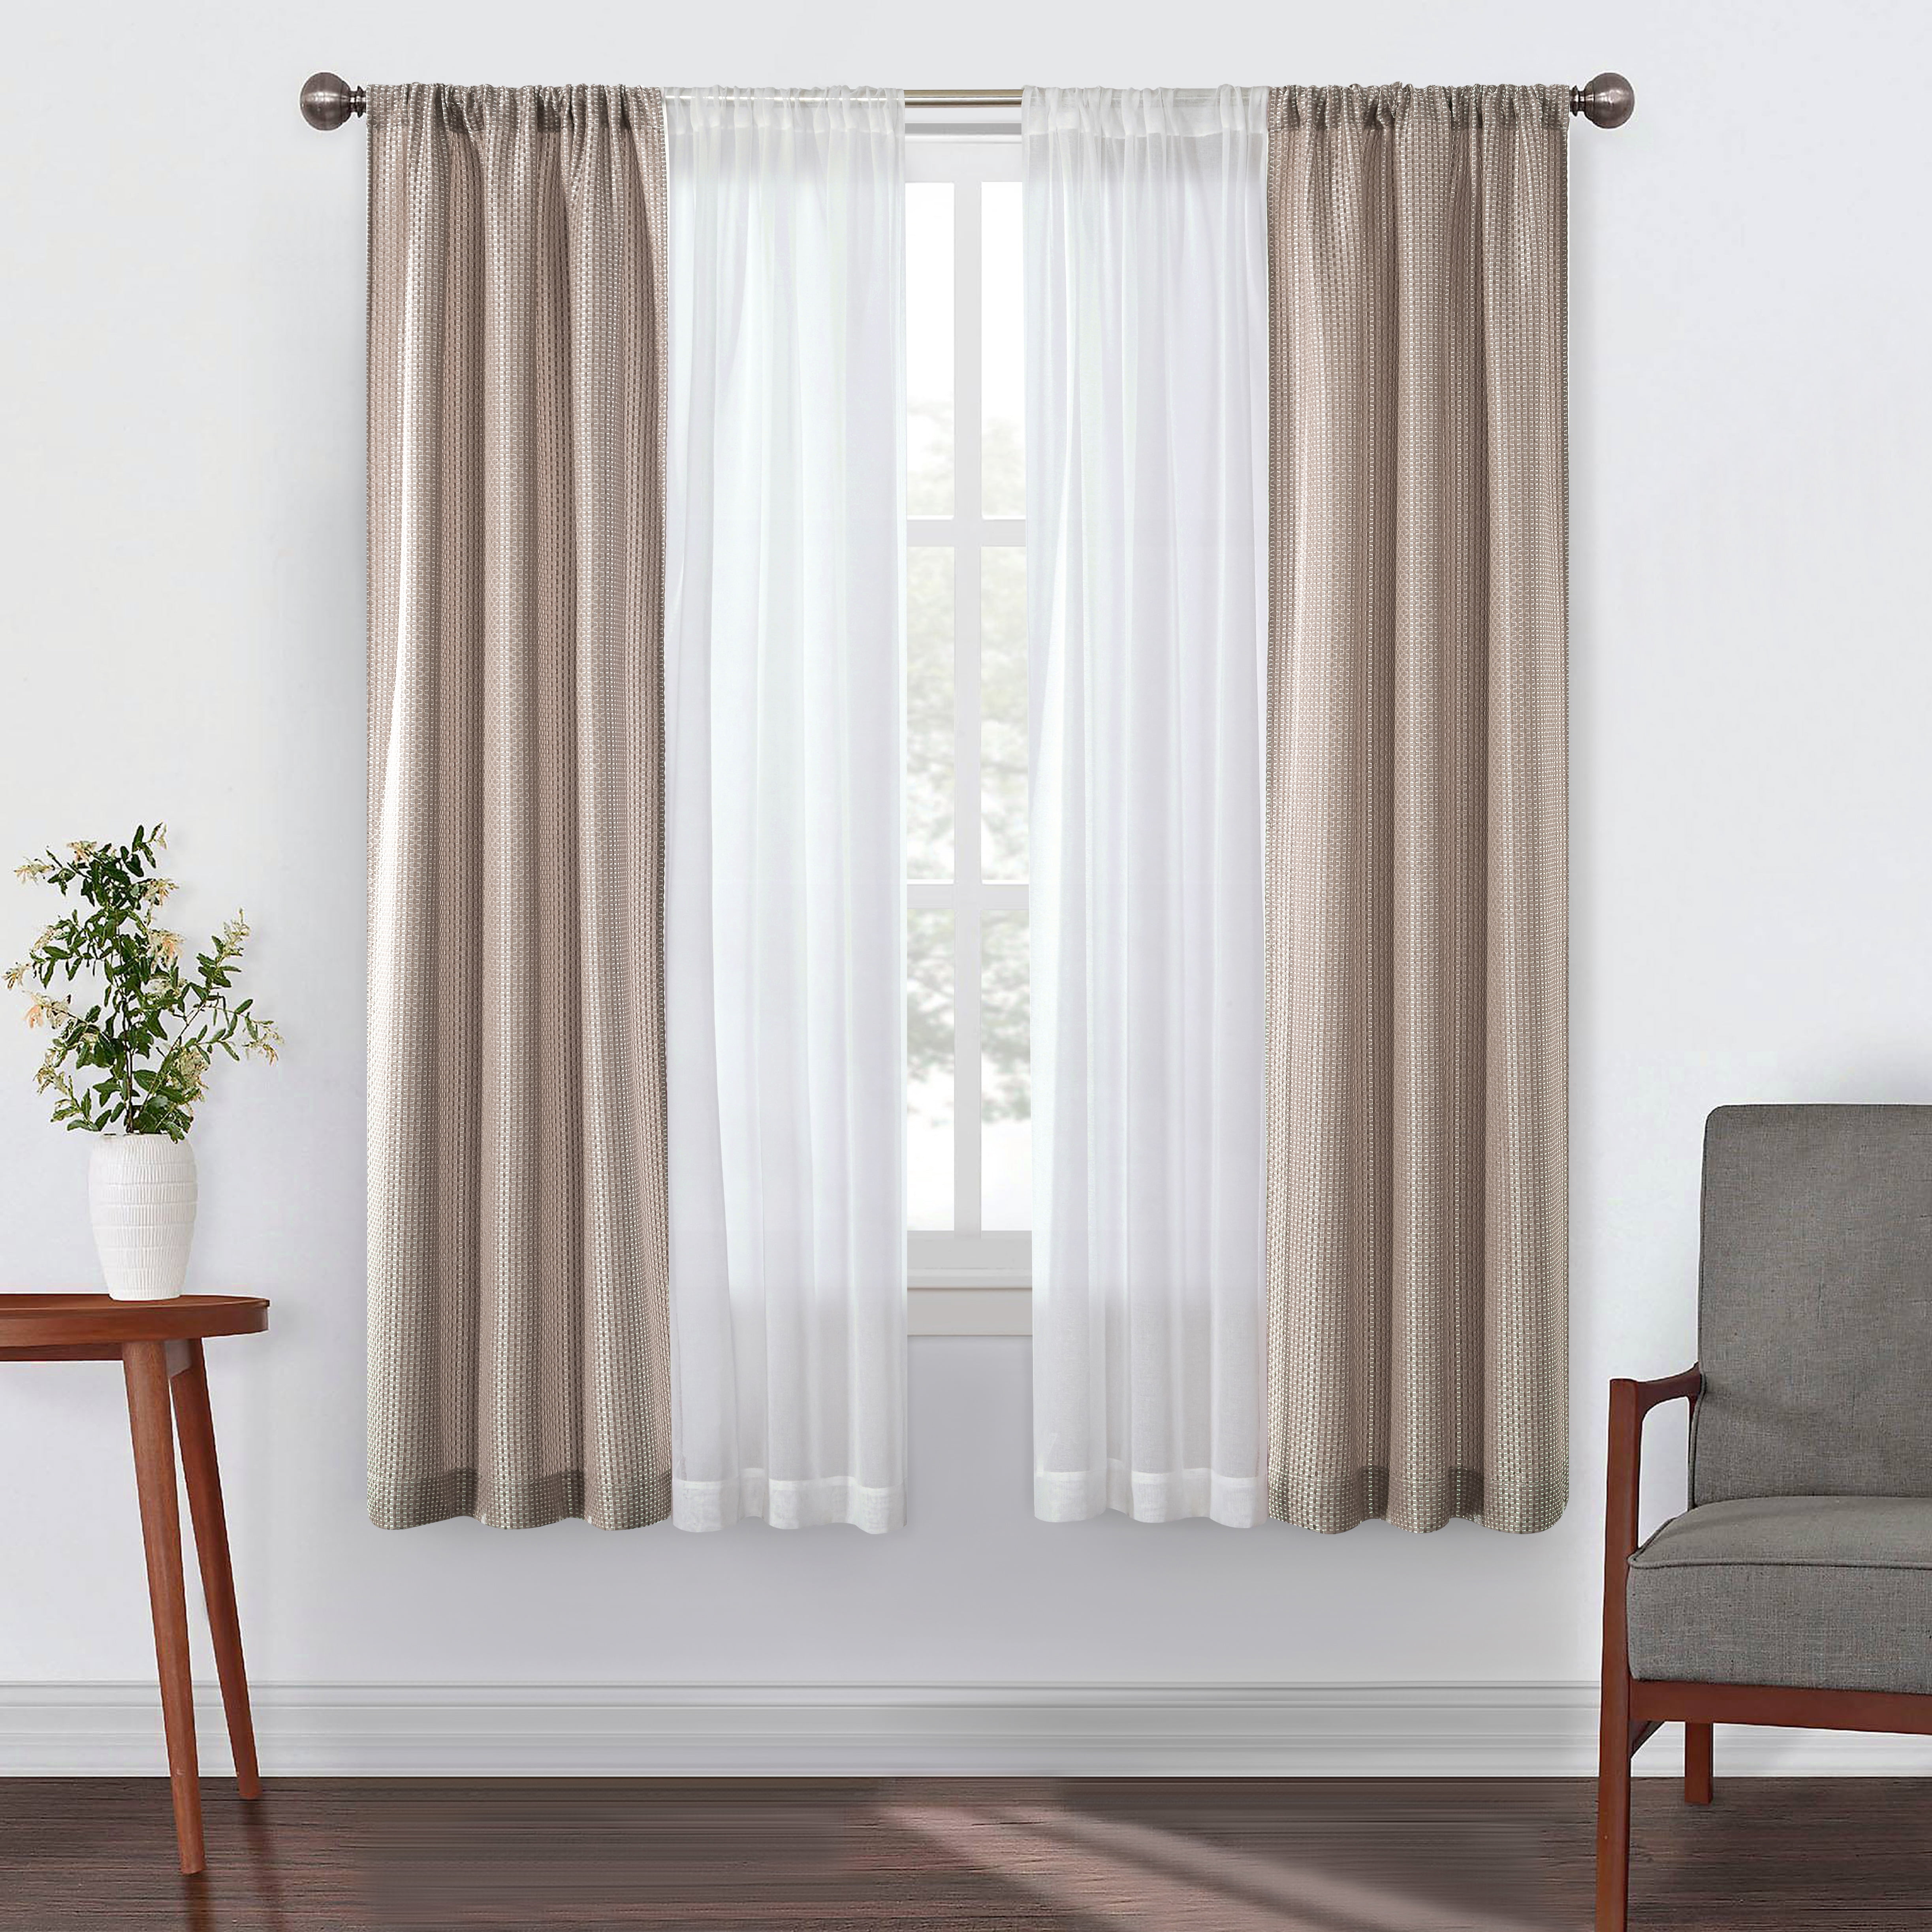 Better Homes Sheer 4 & Curtain Taupe & Stitch Gardens Open Panel Taupe, Solid 74x63 Piece Set, 